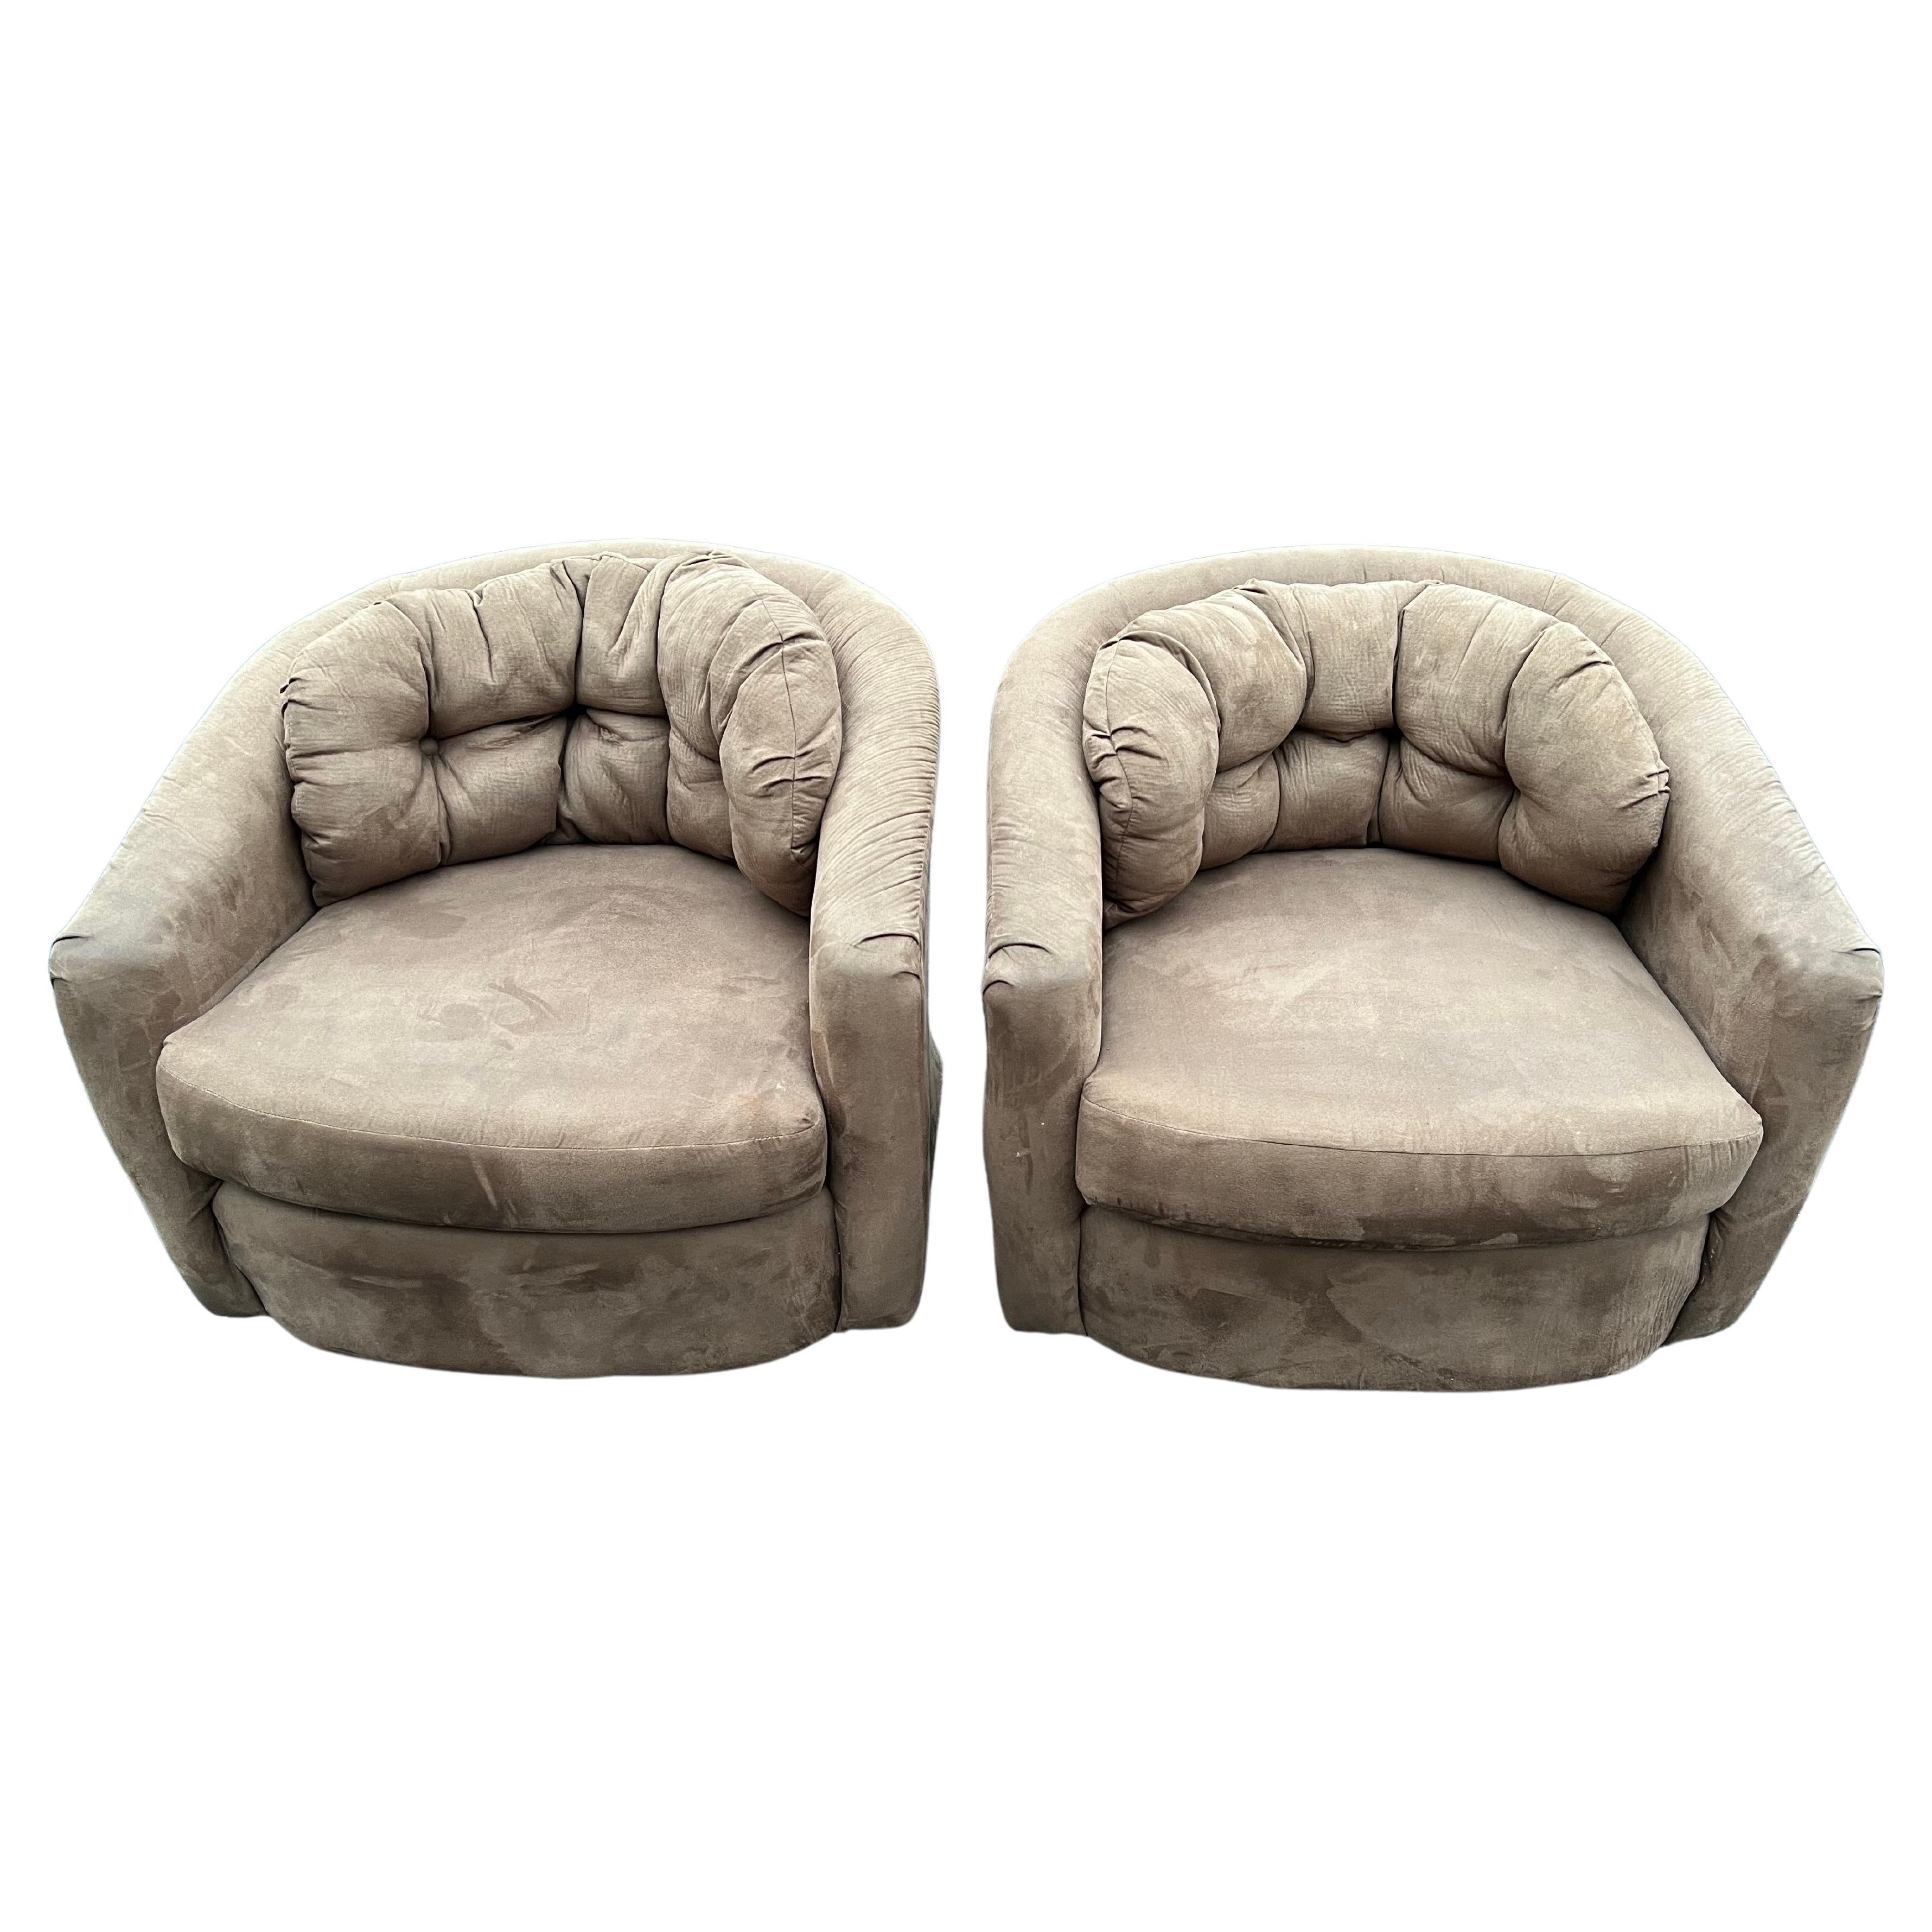 Pair of Mid Century Swivel Club Chairs For Sale